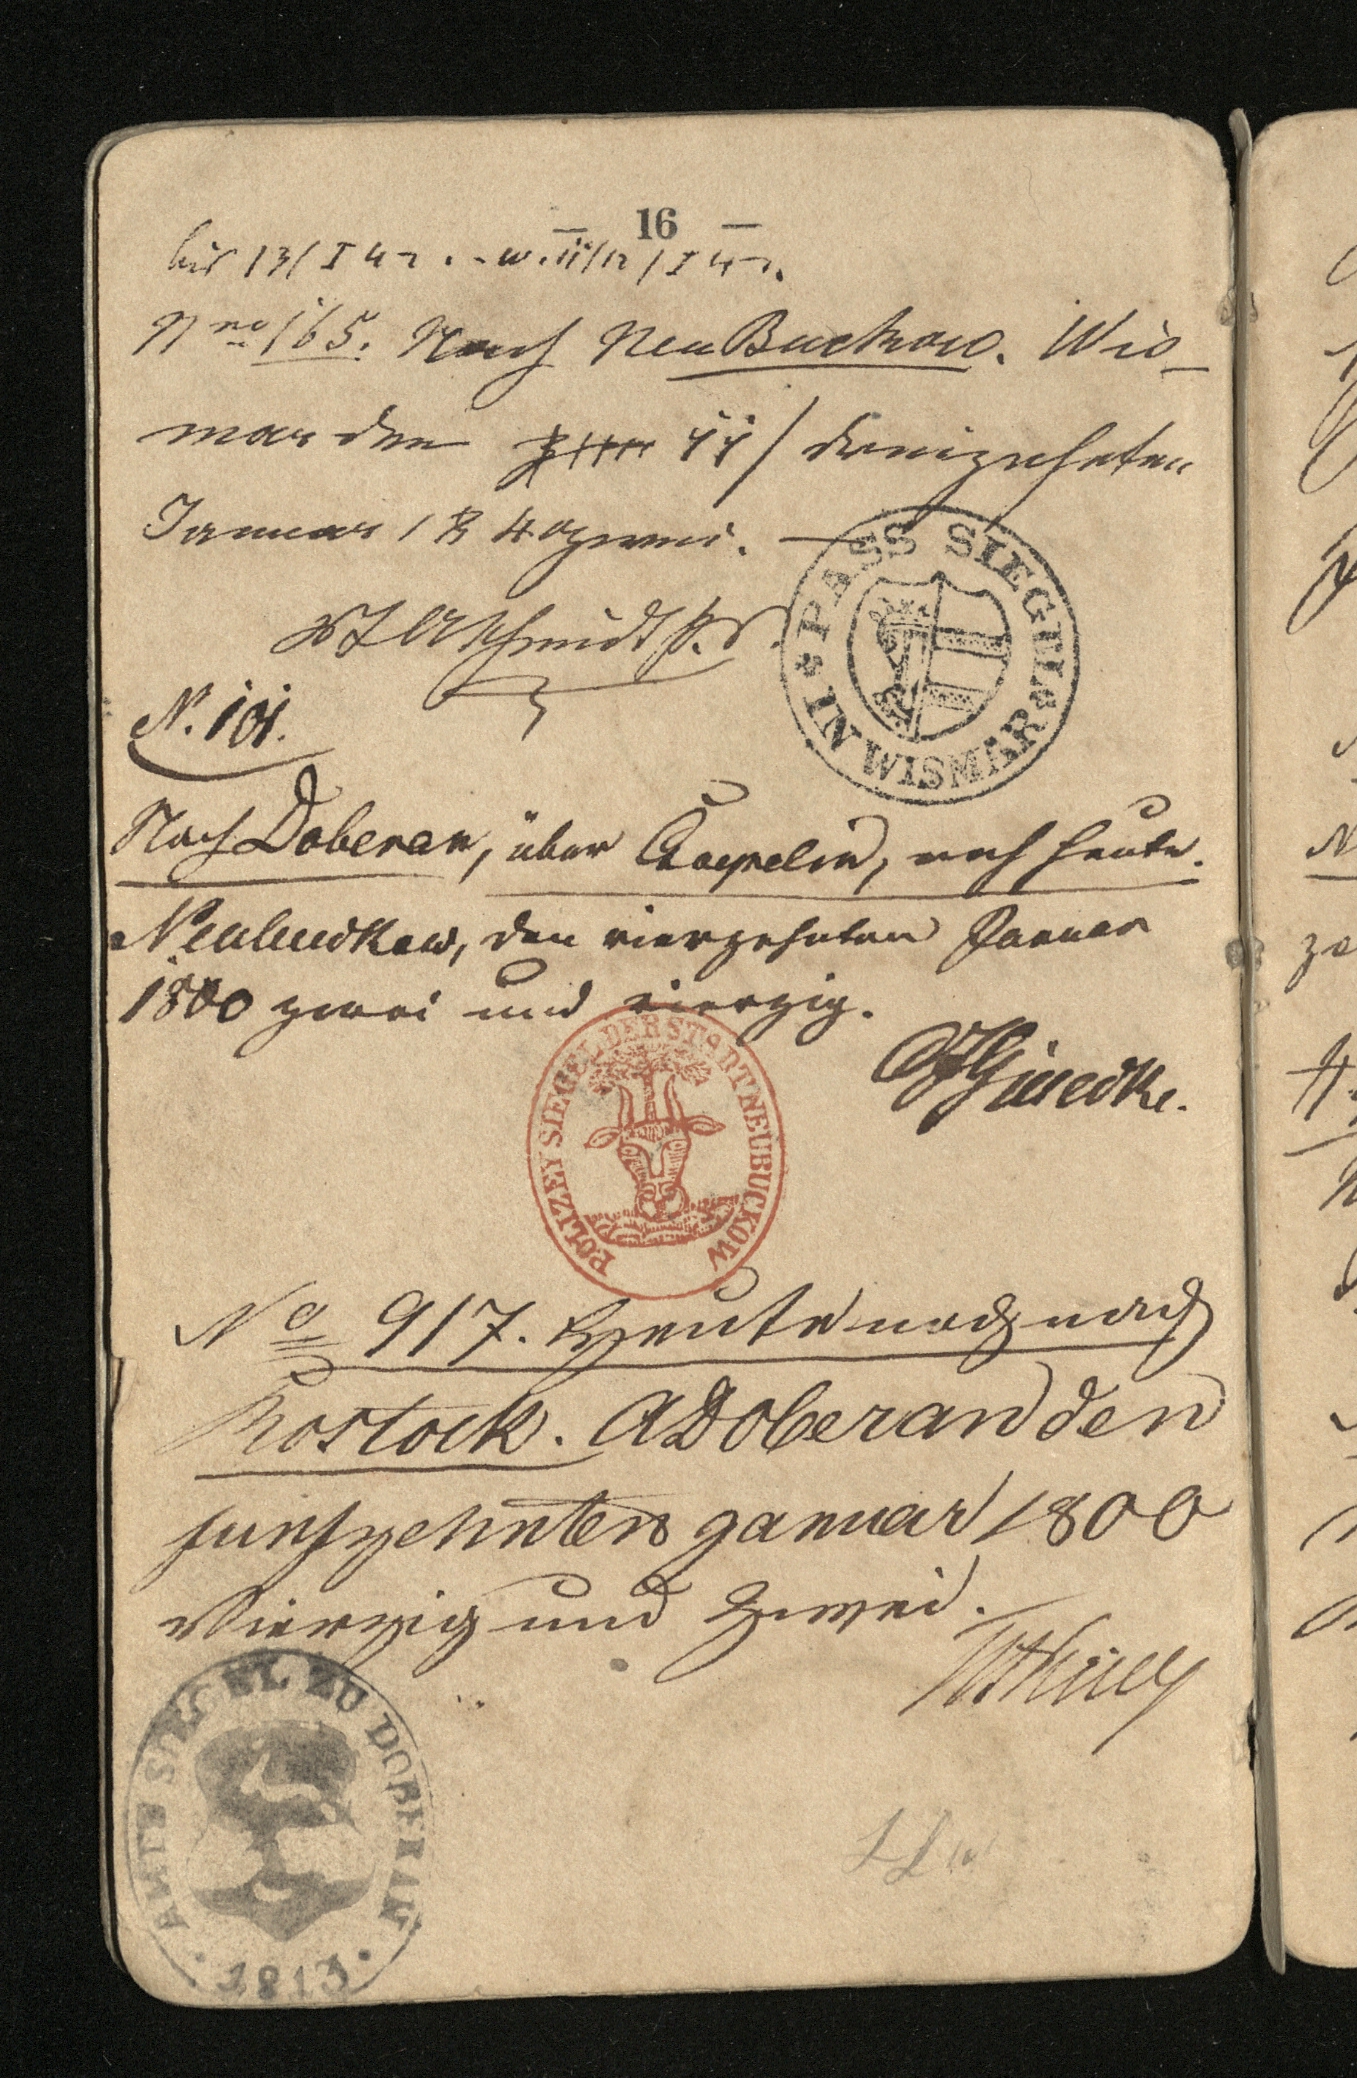 Typical Wanderbuch page with stamped town seals and handwritten travel permits (p16 Busch's Wanderbuch)